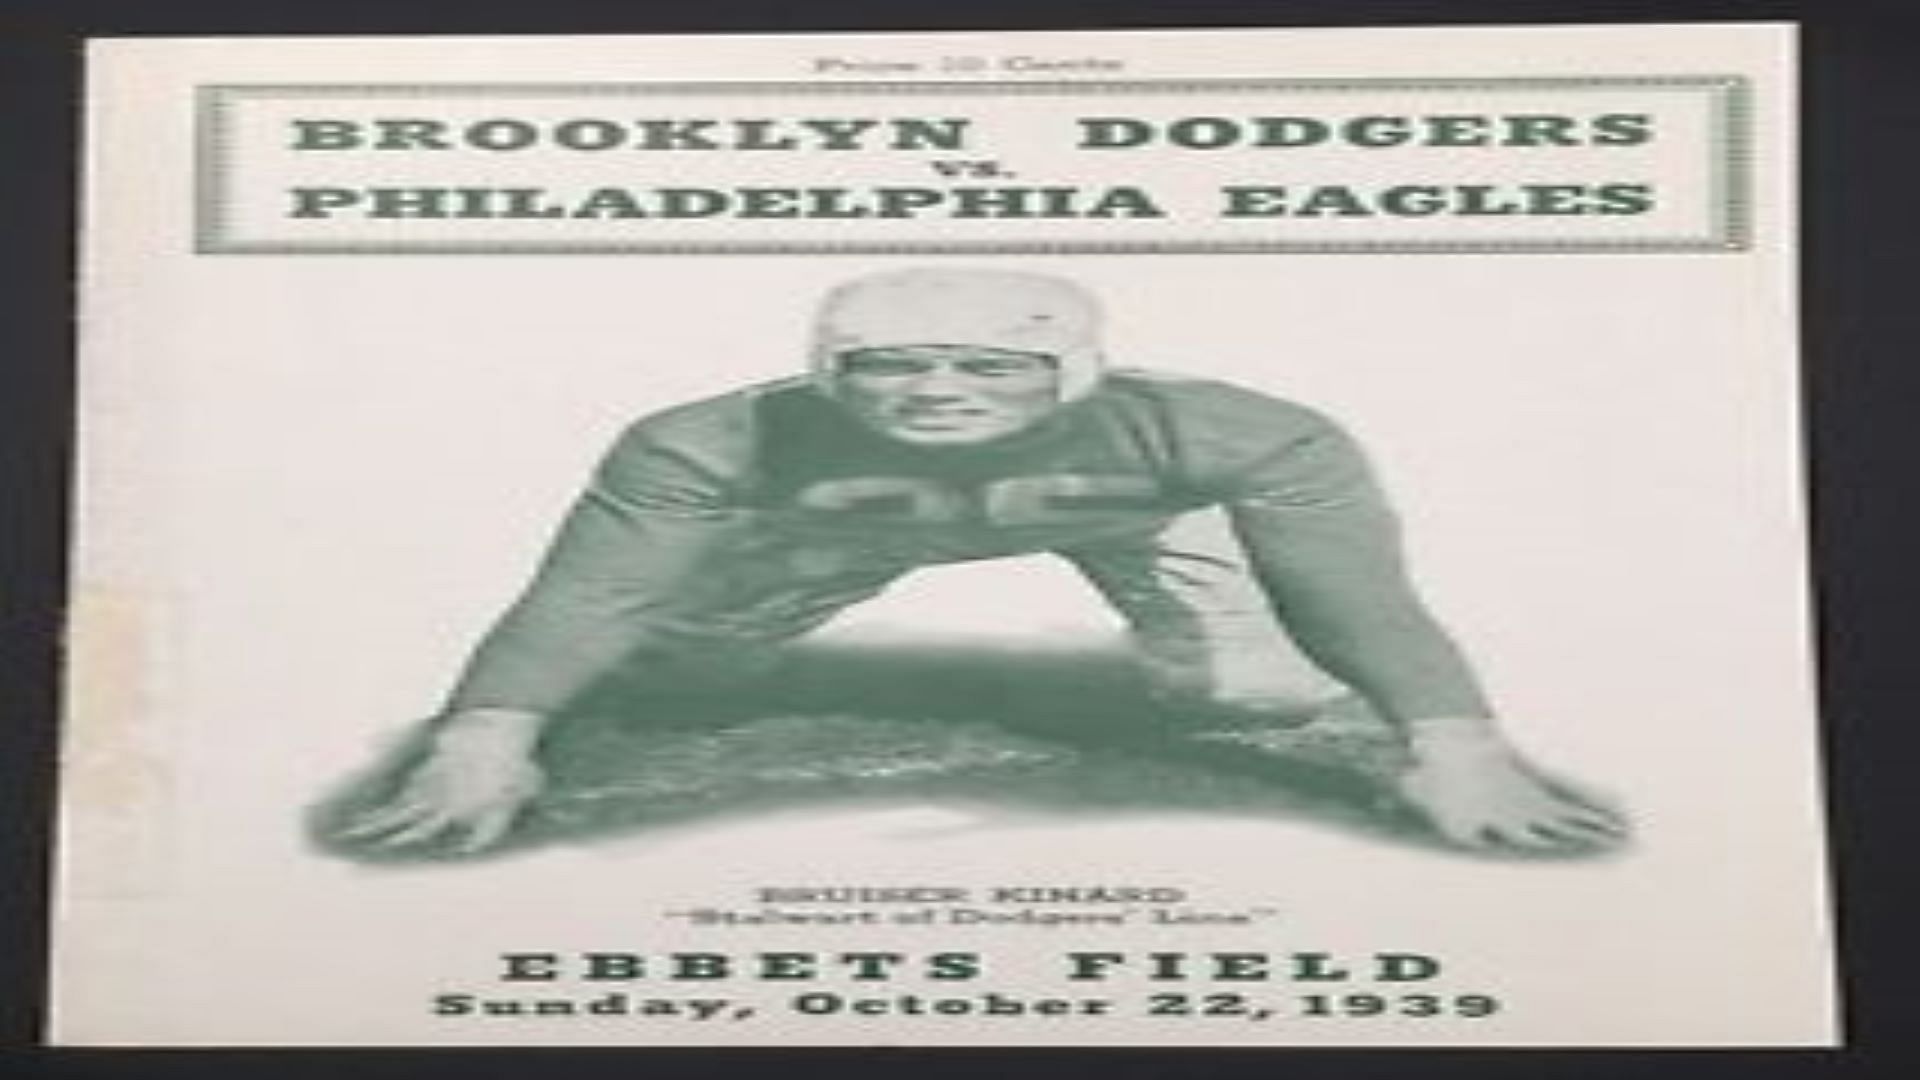 Program from the first ever televised NFL game